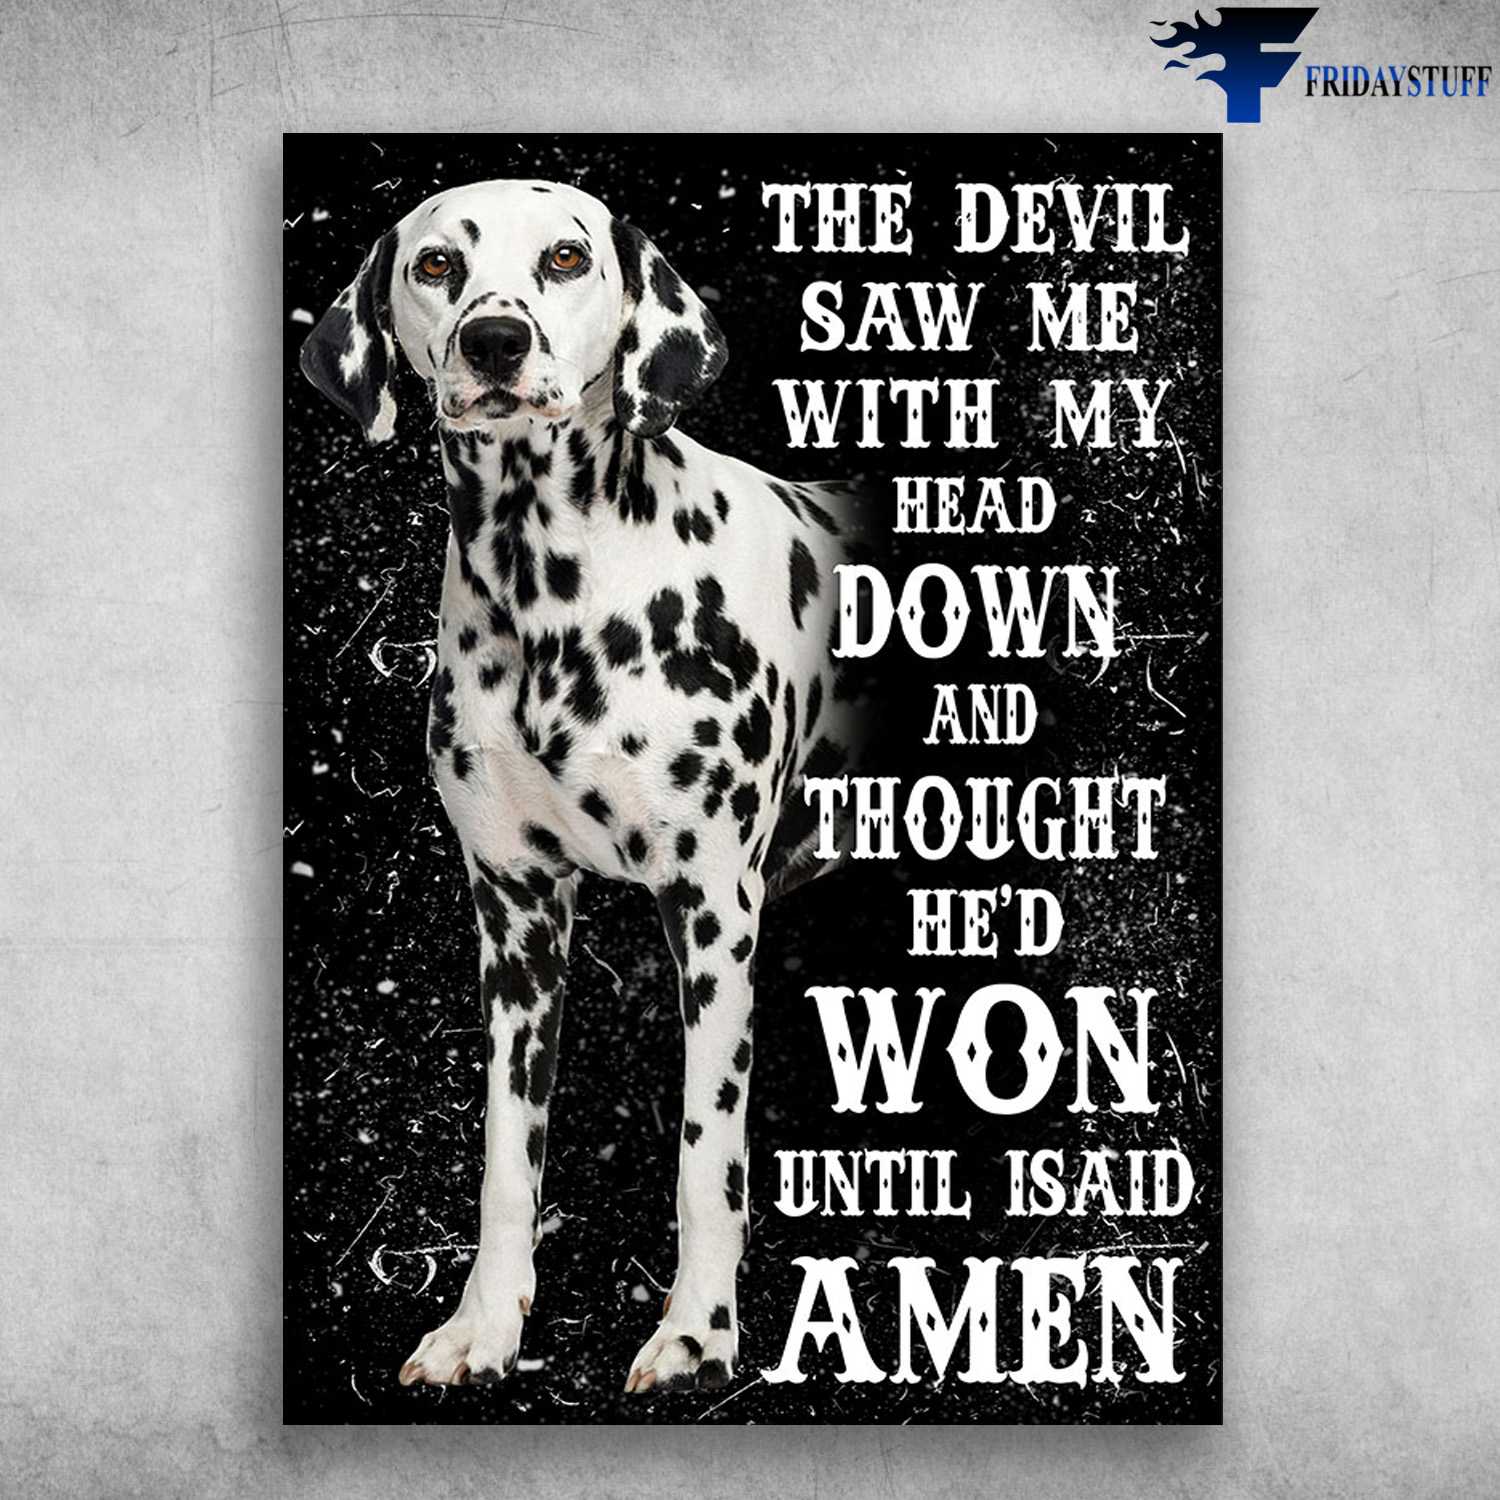 Dalmatian Dog, Dog Lover, The Devil Saw Me, With My Head Down And Thought, He'd Won Until I Said Amen